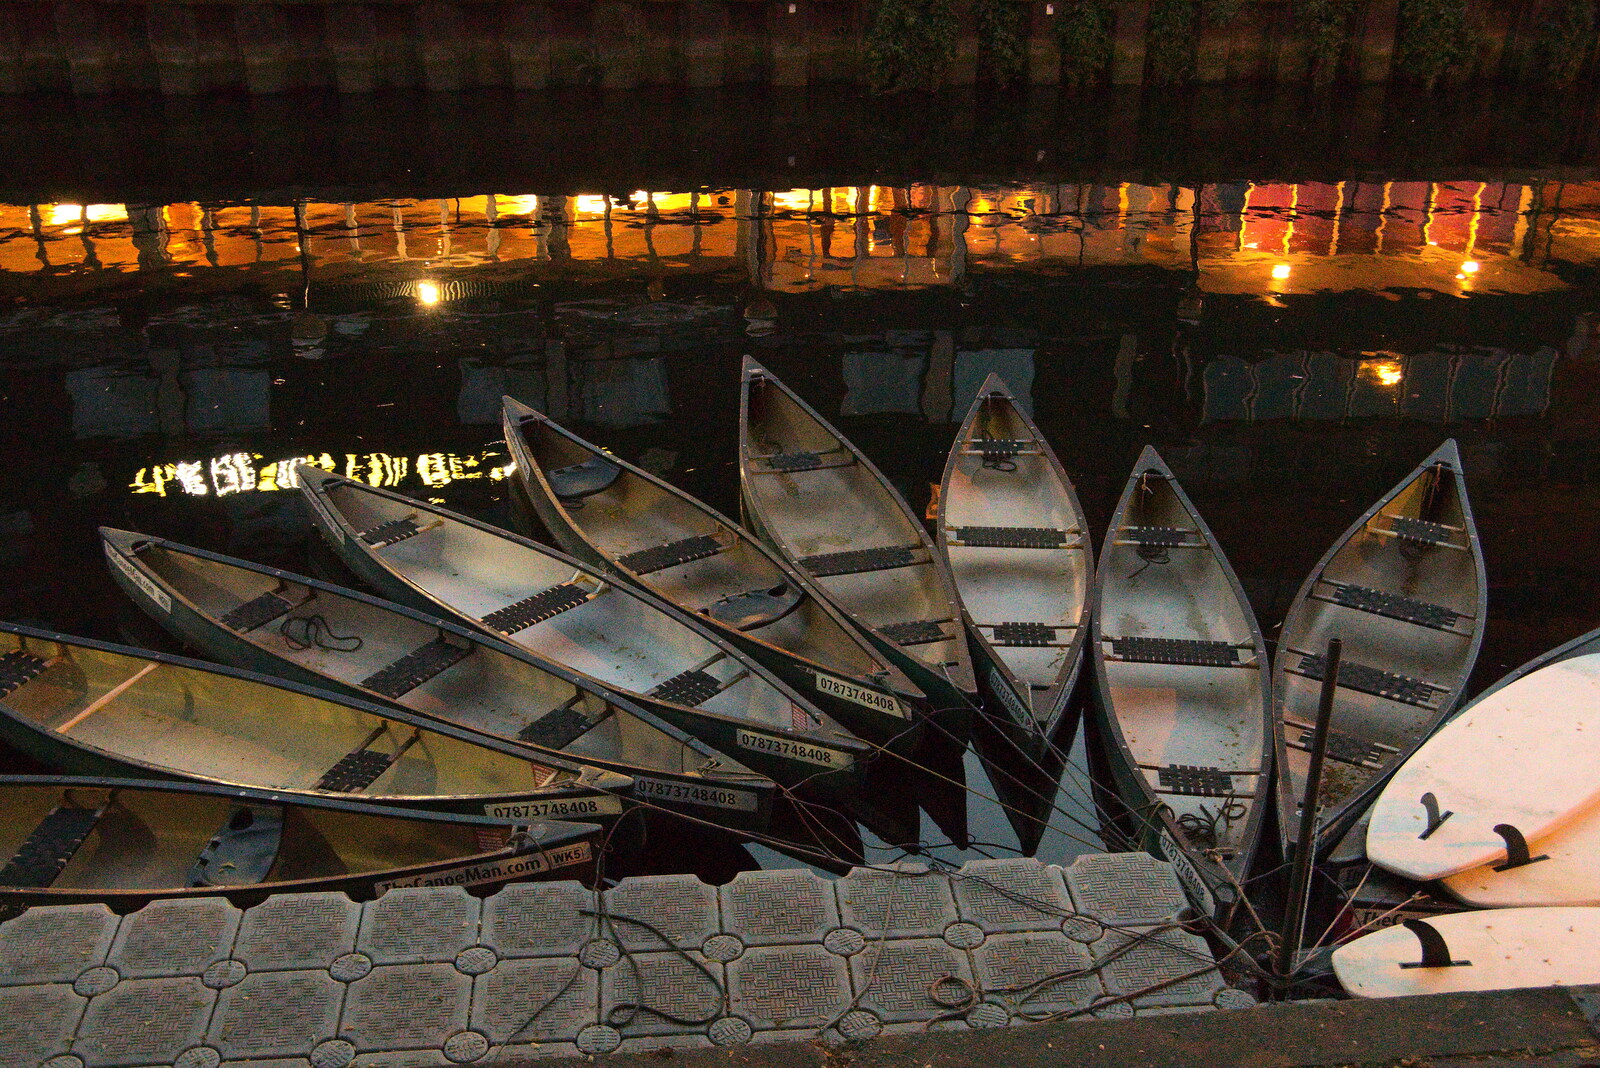 Nicely-arranged canoes on the river at Norwich from A Trip to Nando's, Riverside, Norwich, Norfolk - 23rd July 2021